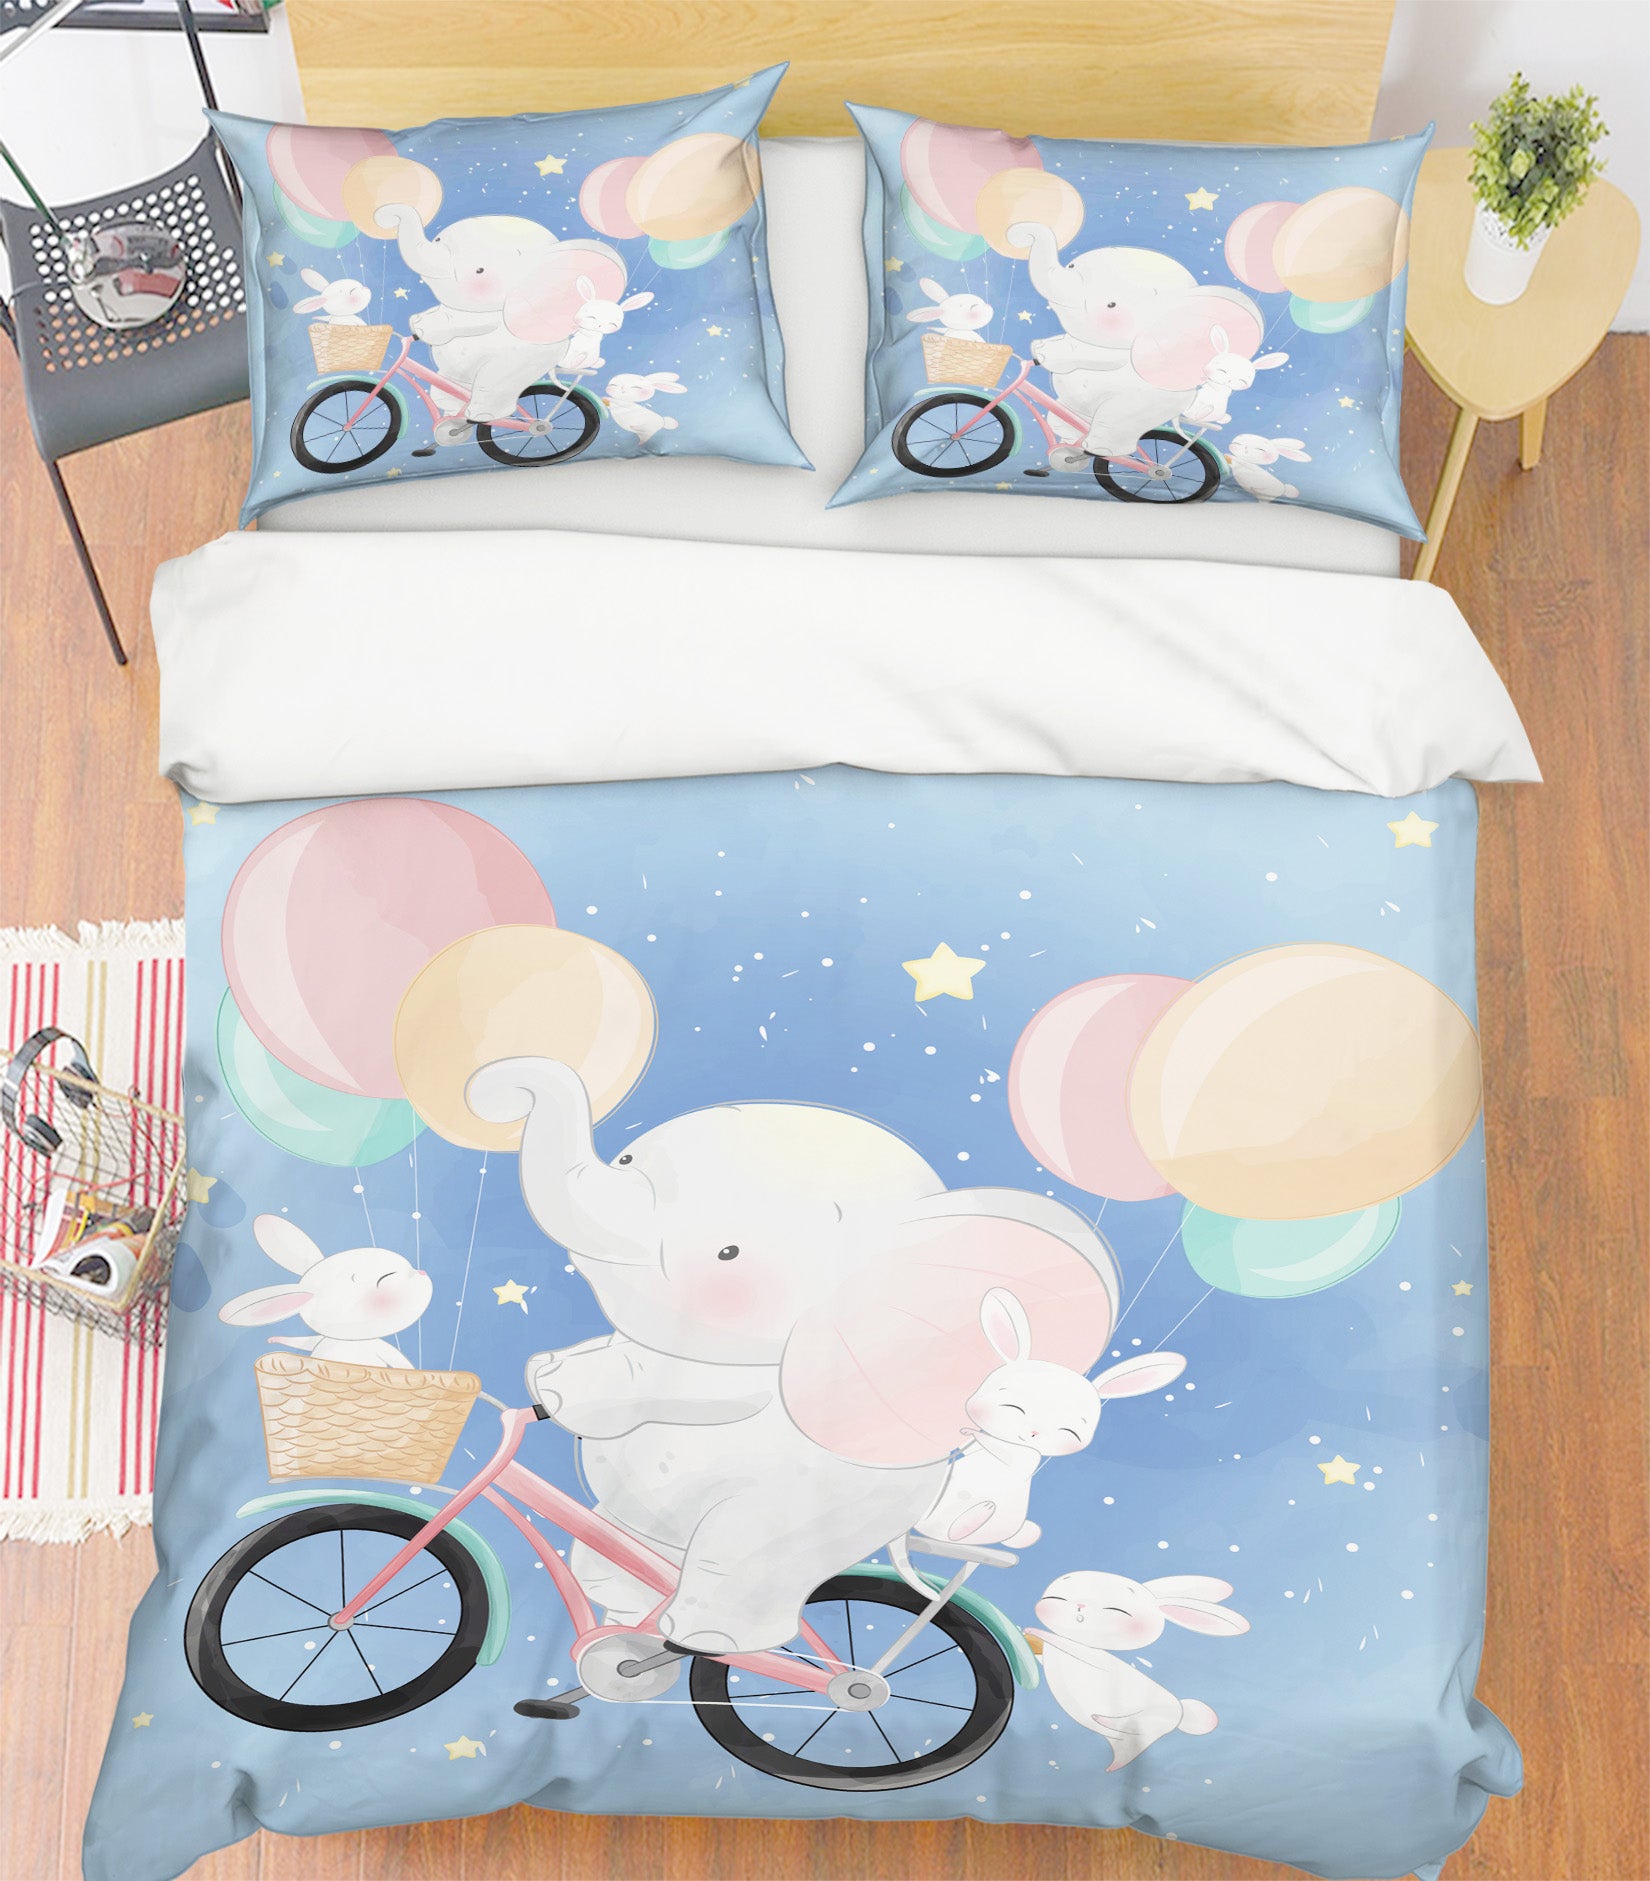 3D Bicycle Elephant Balloon 67042 Bed Pillowcases Quilt